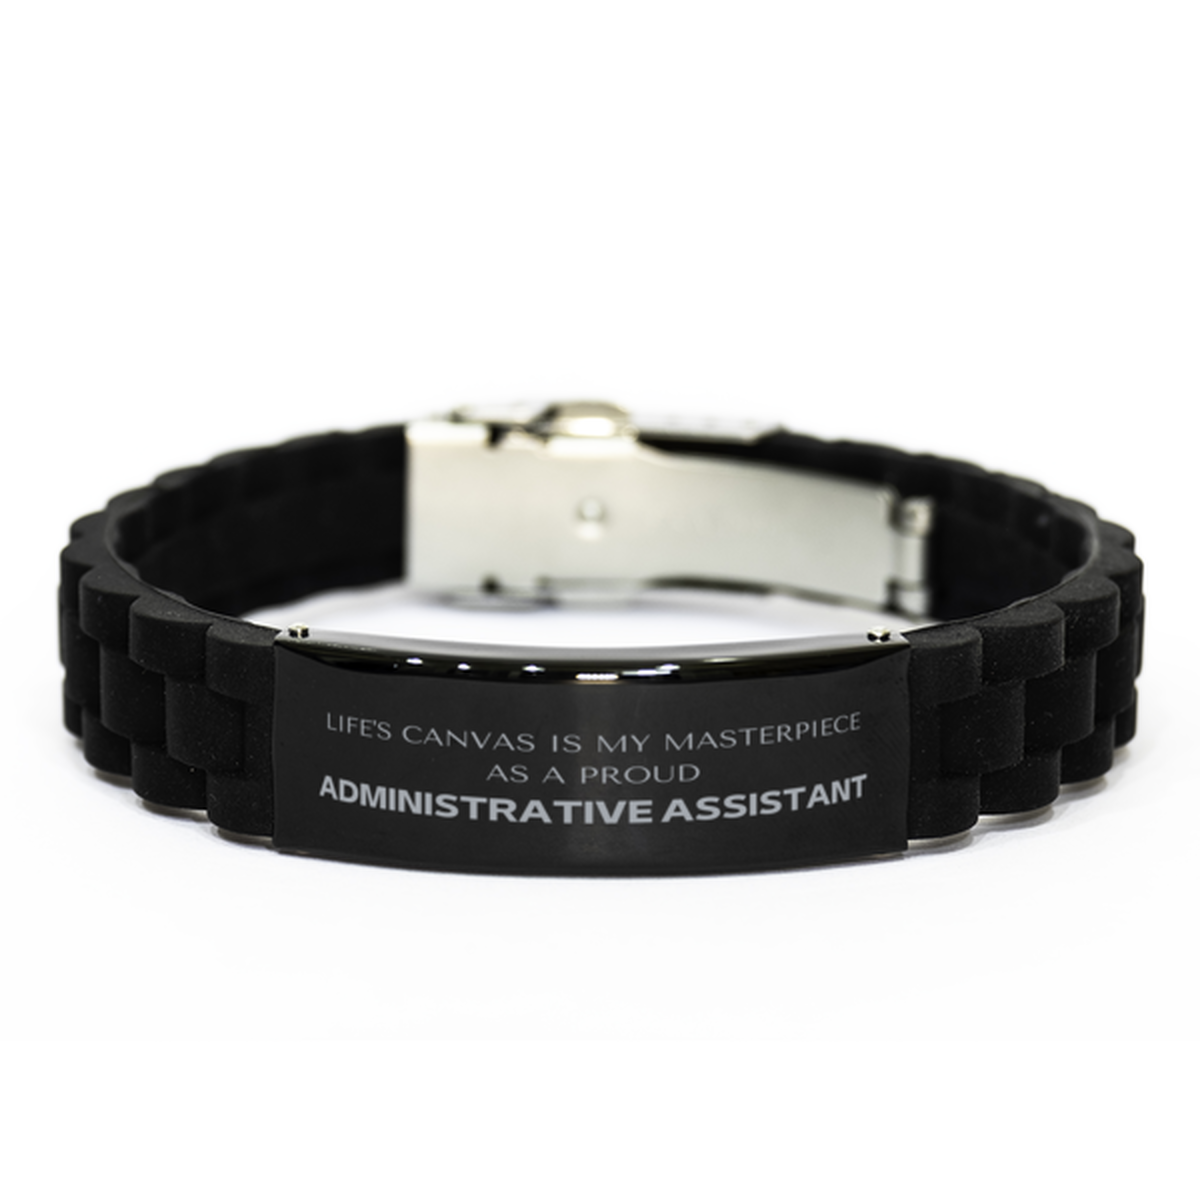 Proud Administrative Assistant Gifts, Life's canvas is my masterpiece, Epic Birthday Christmas Unique Black Glidelock Clasp Bracelet For Administrative Assistant, Coworkers, Men, Women, Friends